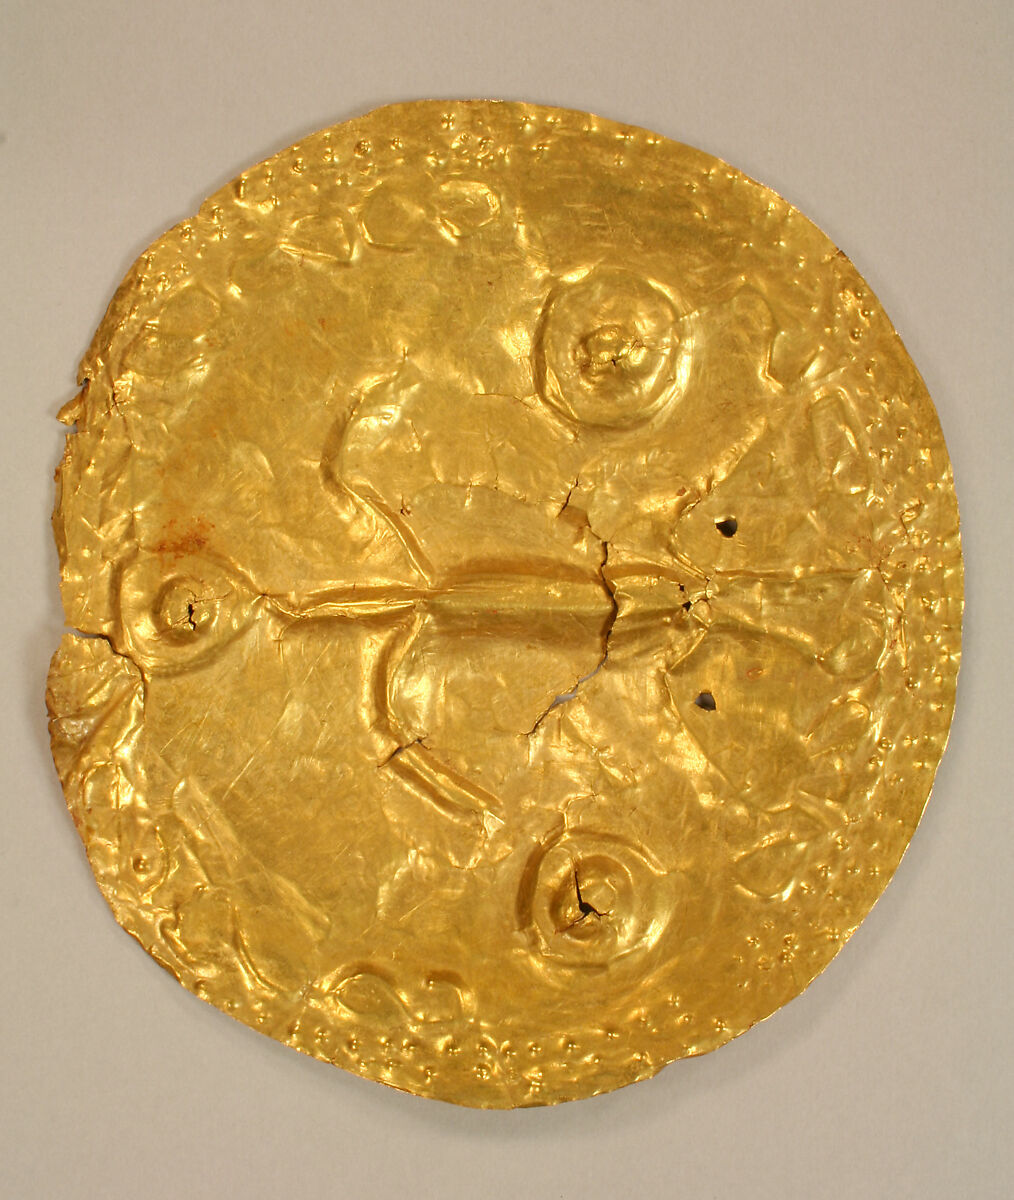 Hammered Gold Patena, Gold (hammered), Costa Rica or Panama 